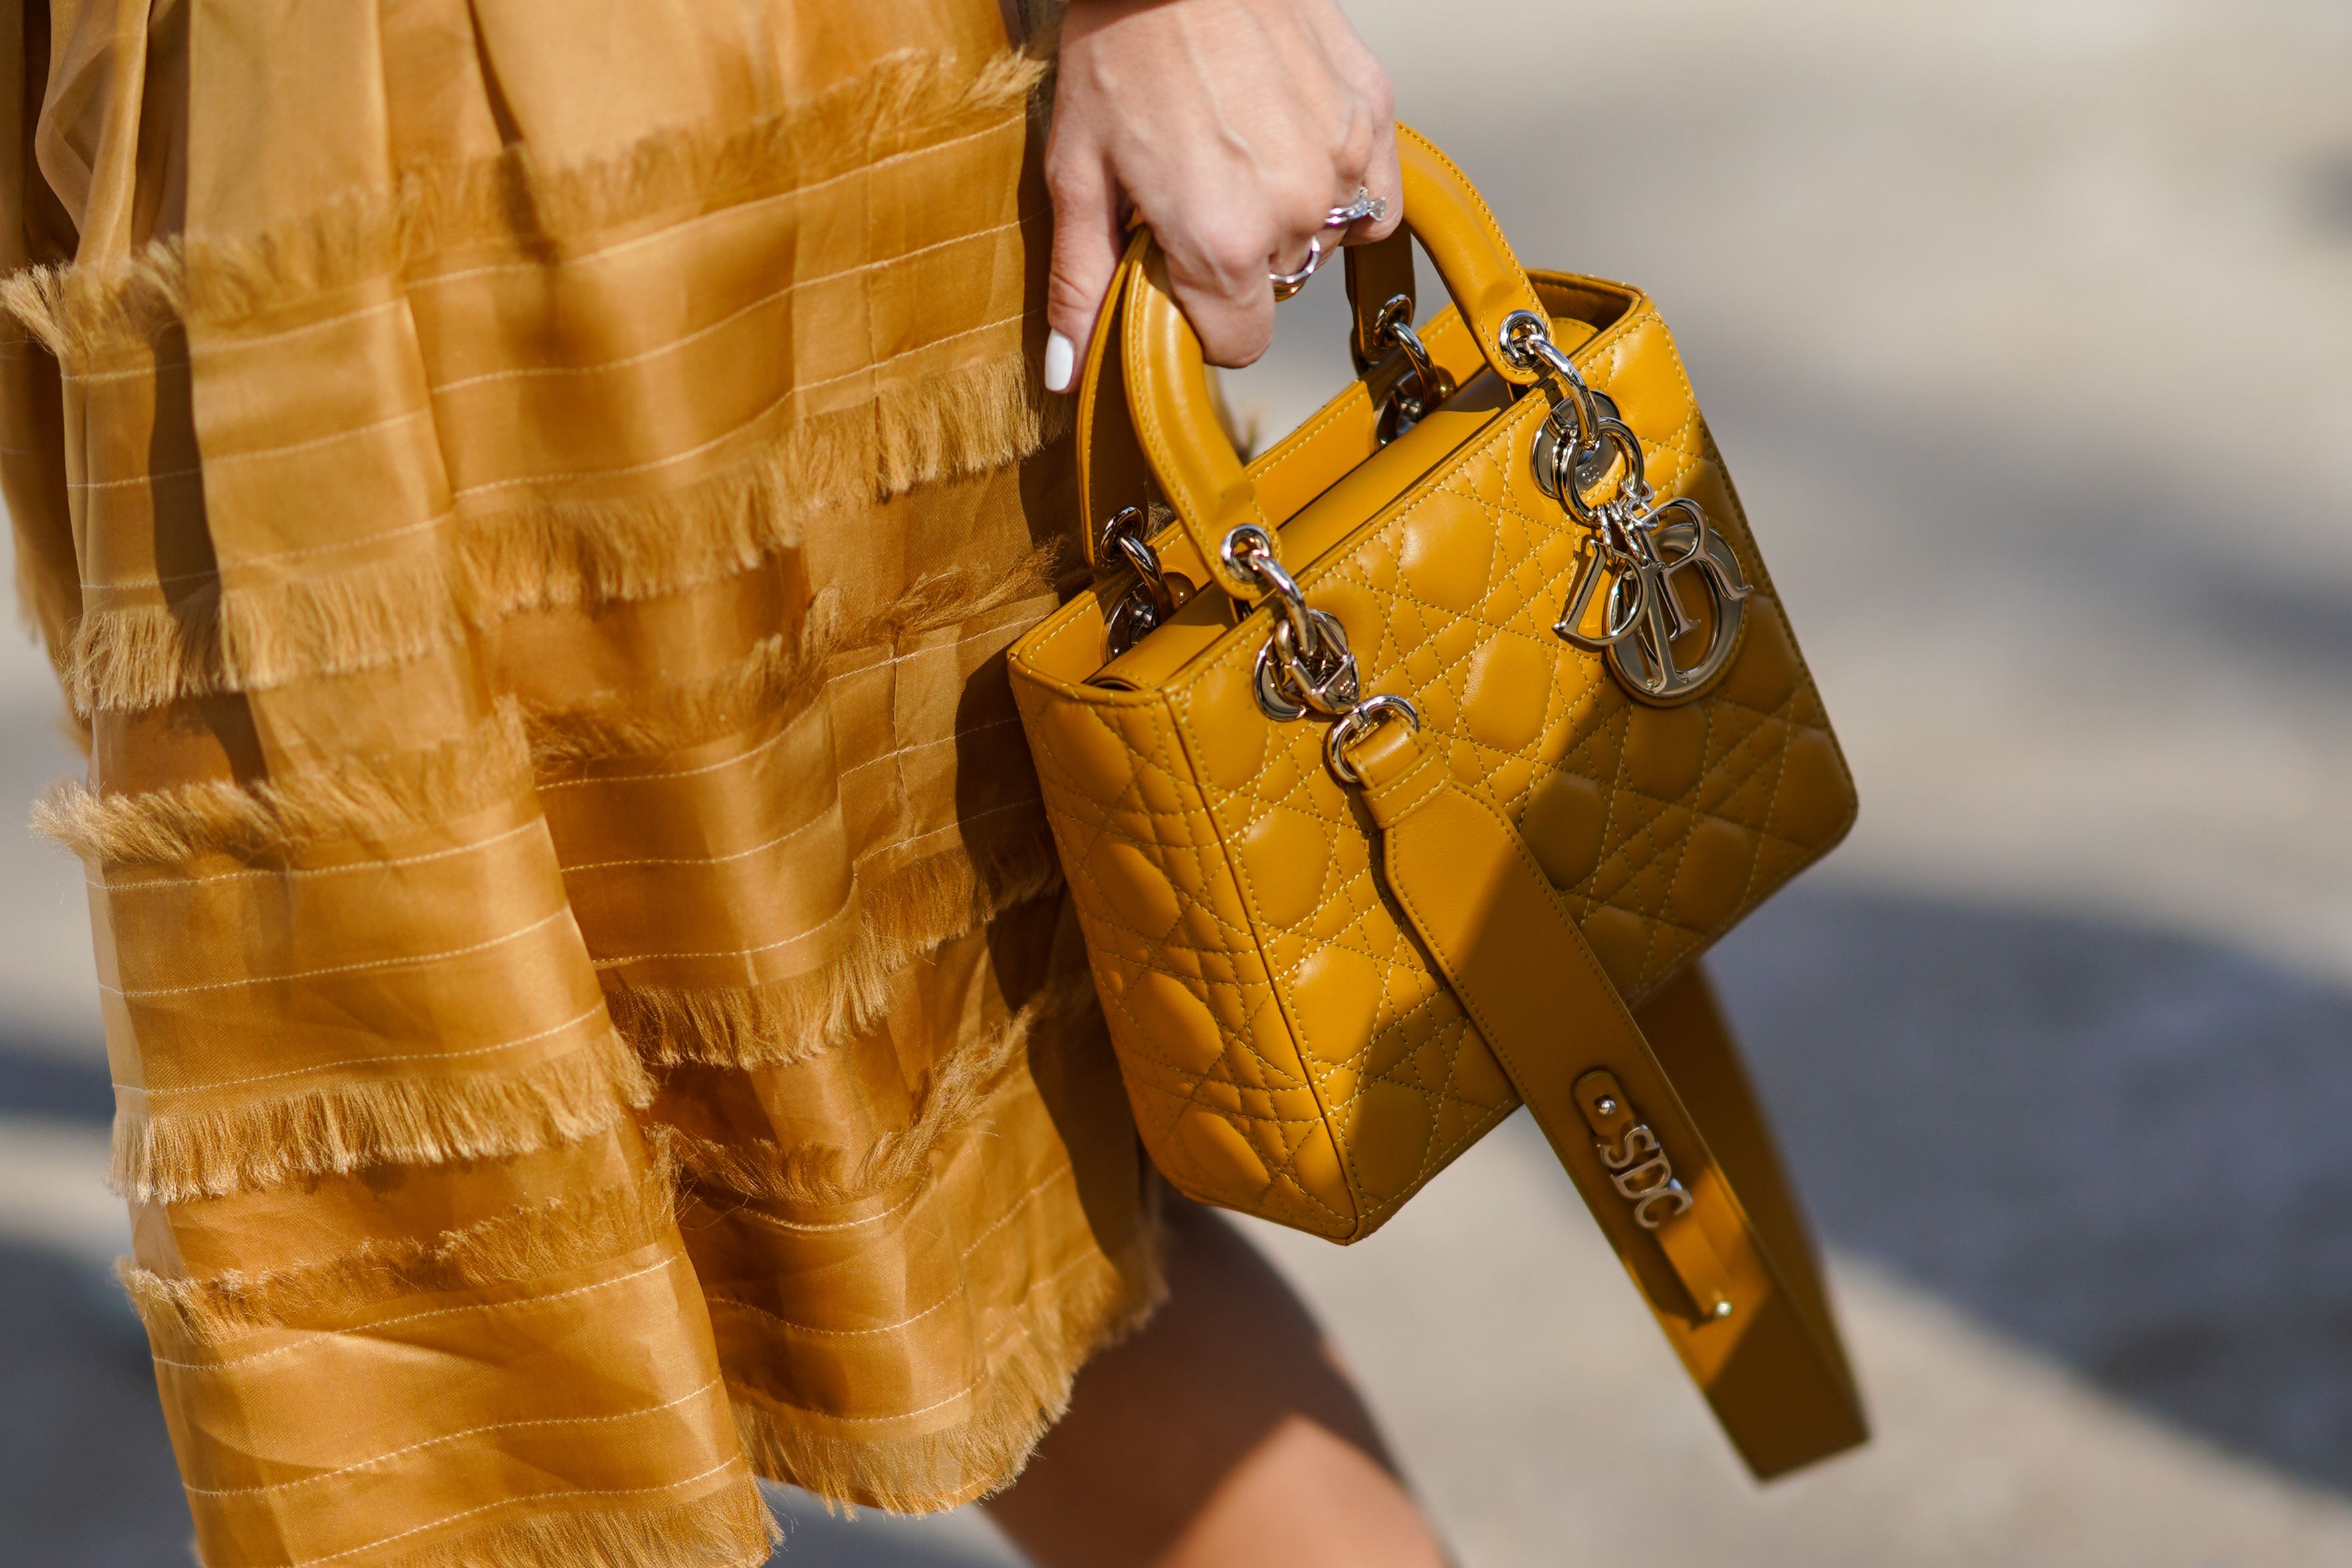 Classic Louis Vuitton Handbags to Invest In in 2021—From the